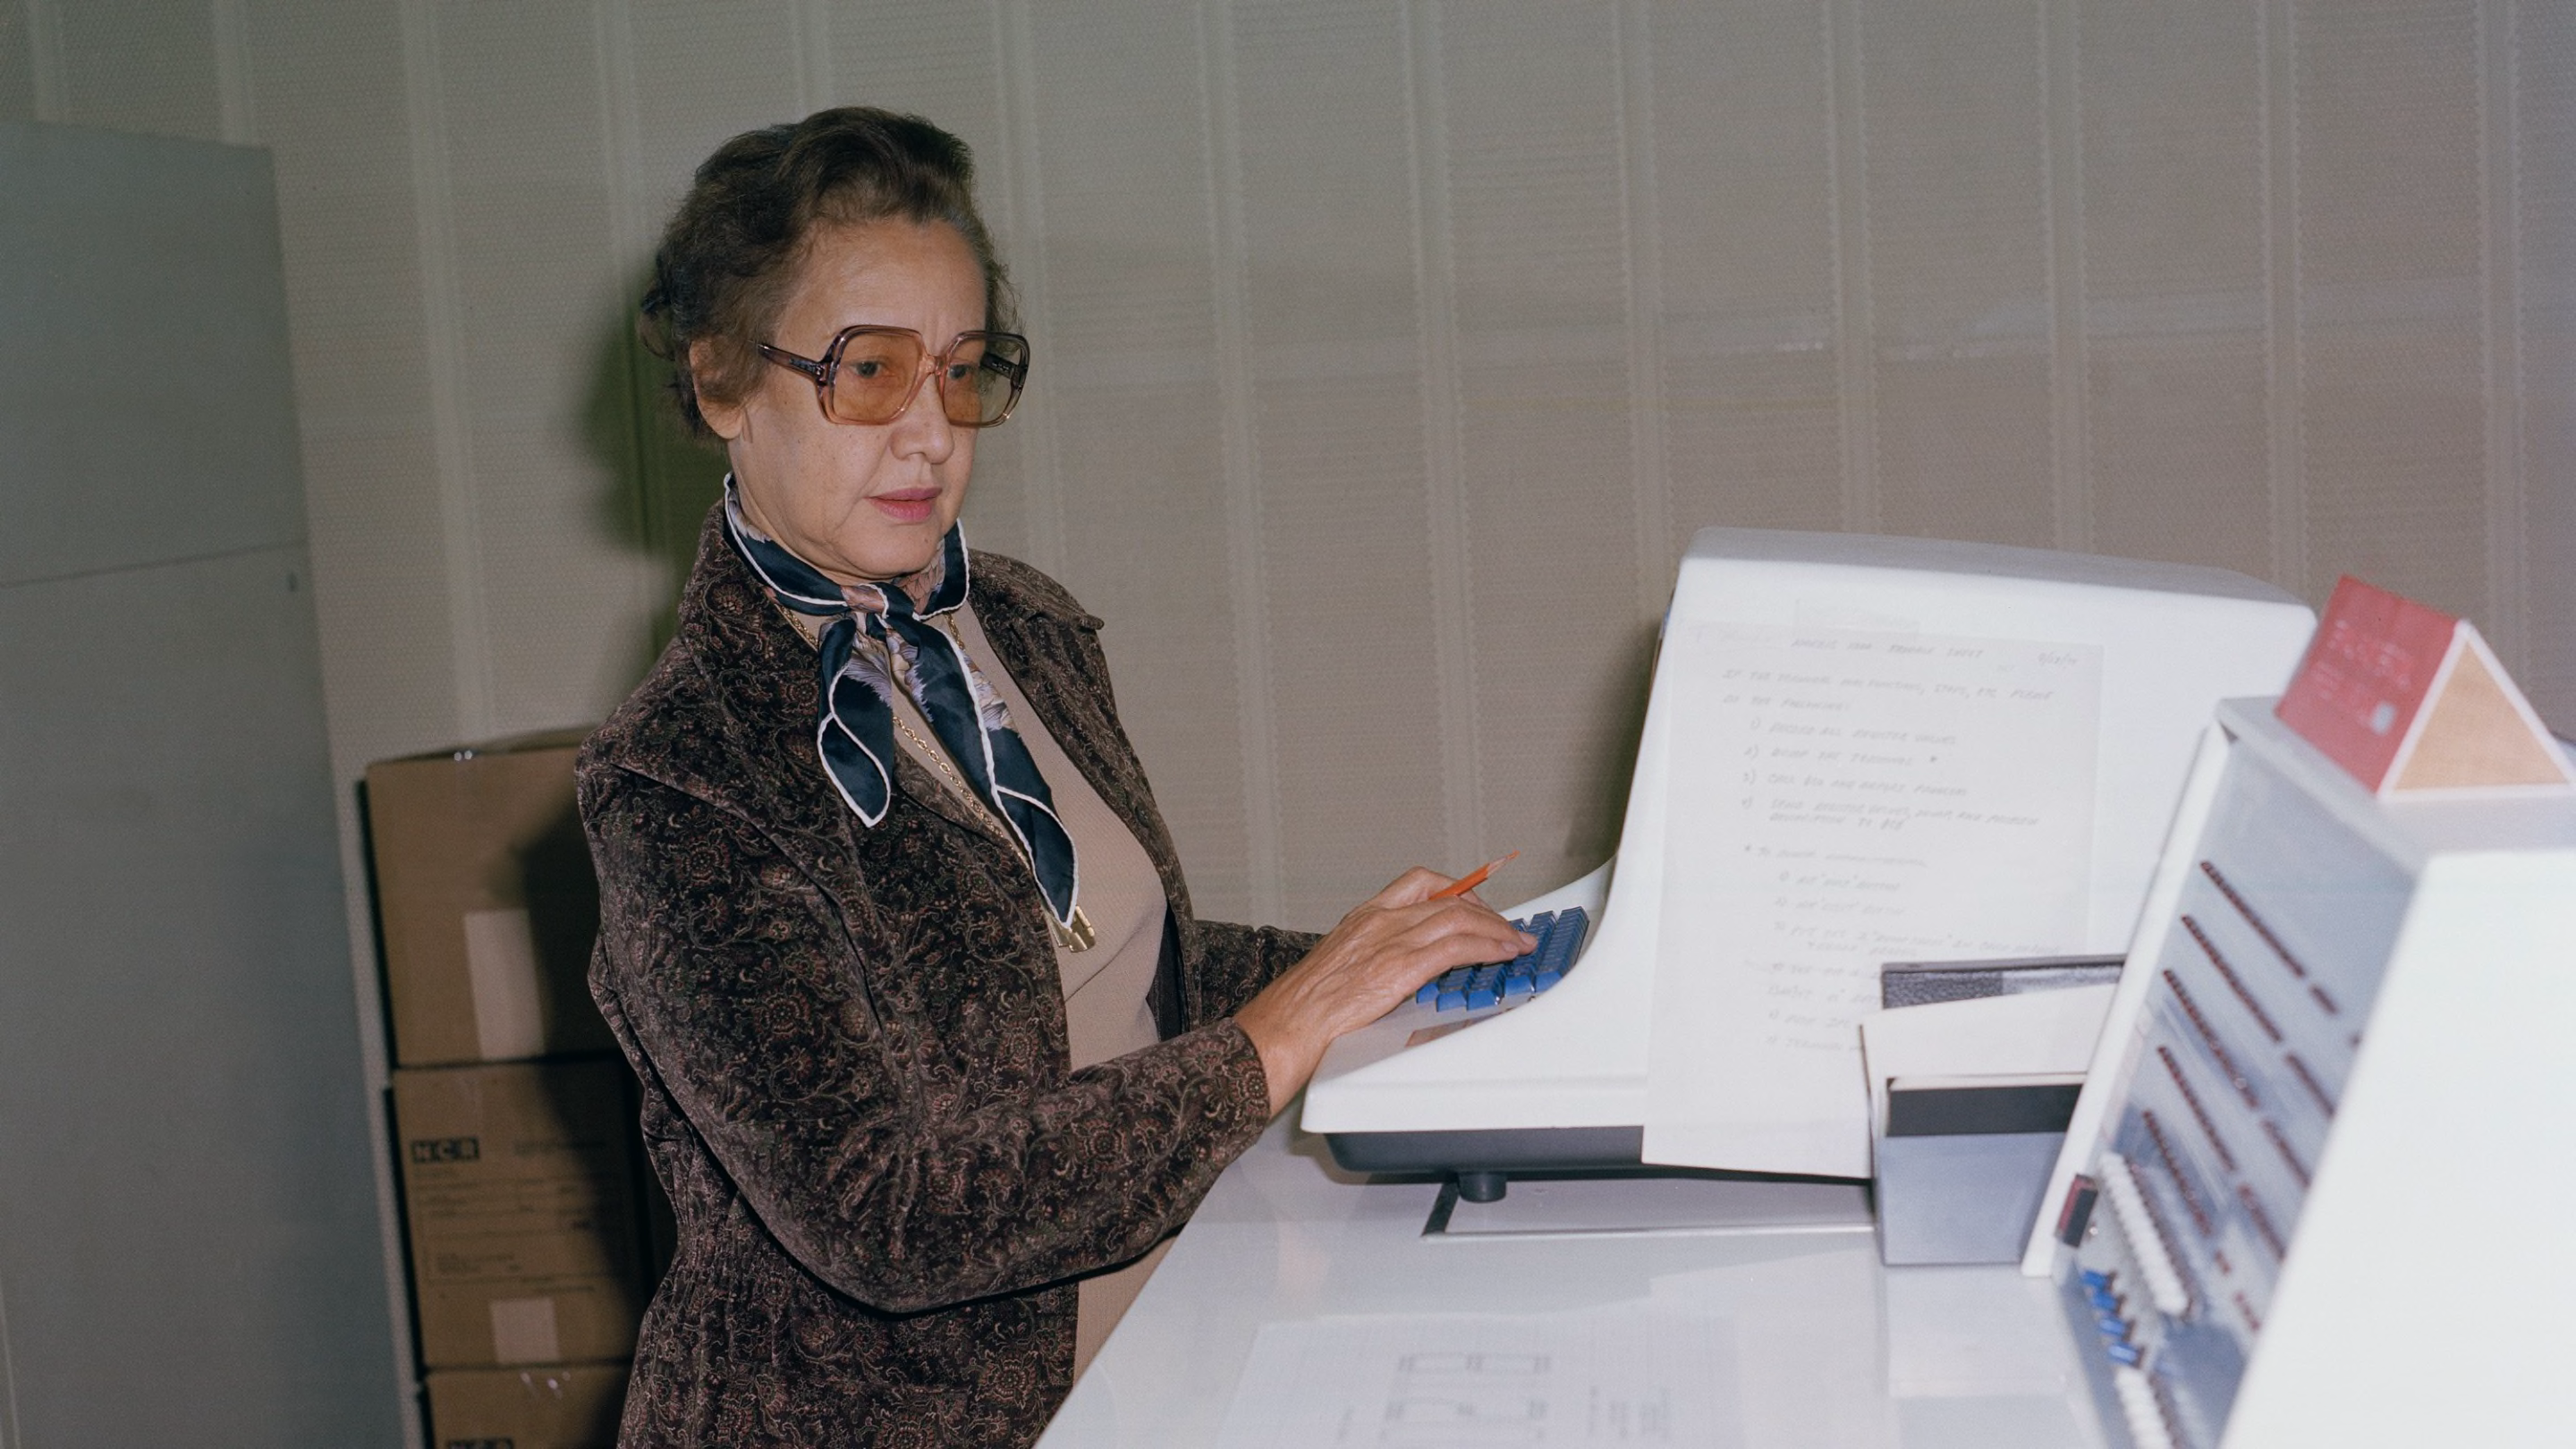 10 Fascinating Facts About Katherine Johnson